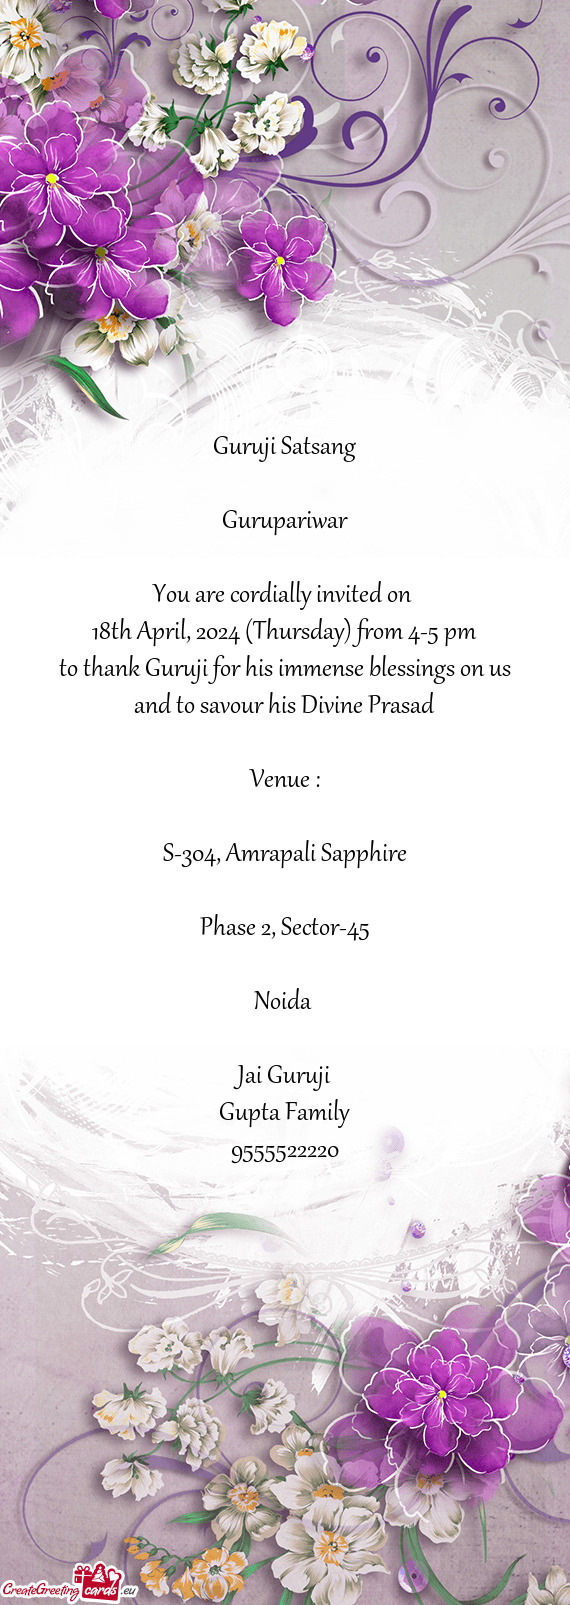 18th April, 2024 (Thursday) from 4-5 pm